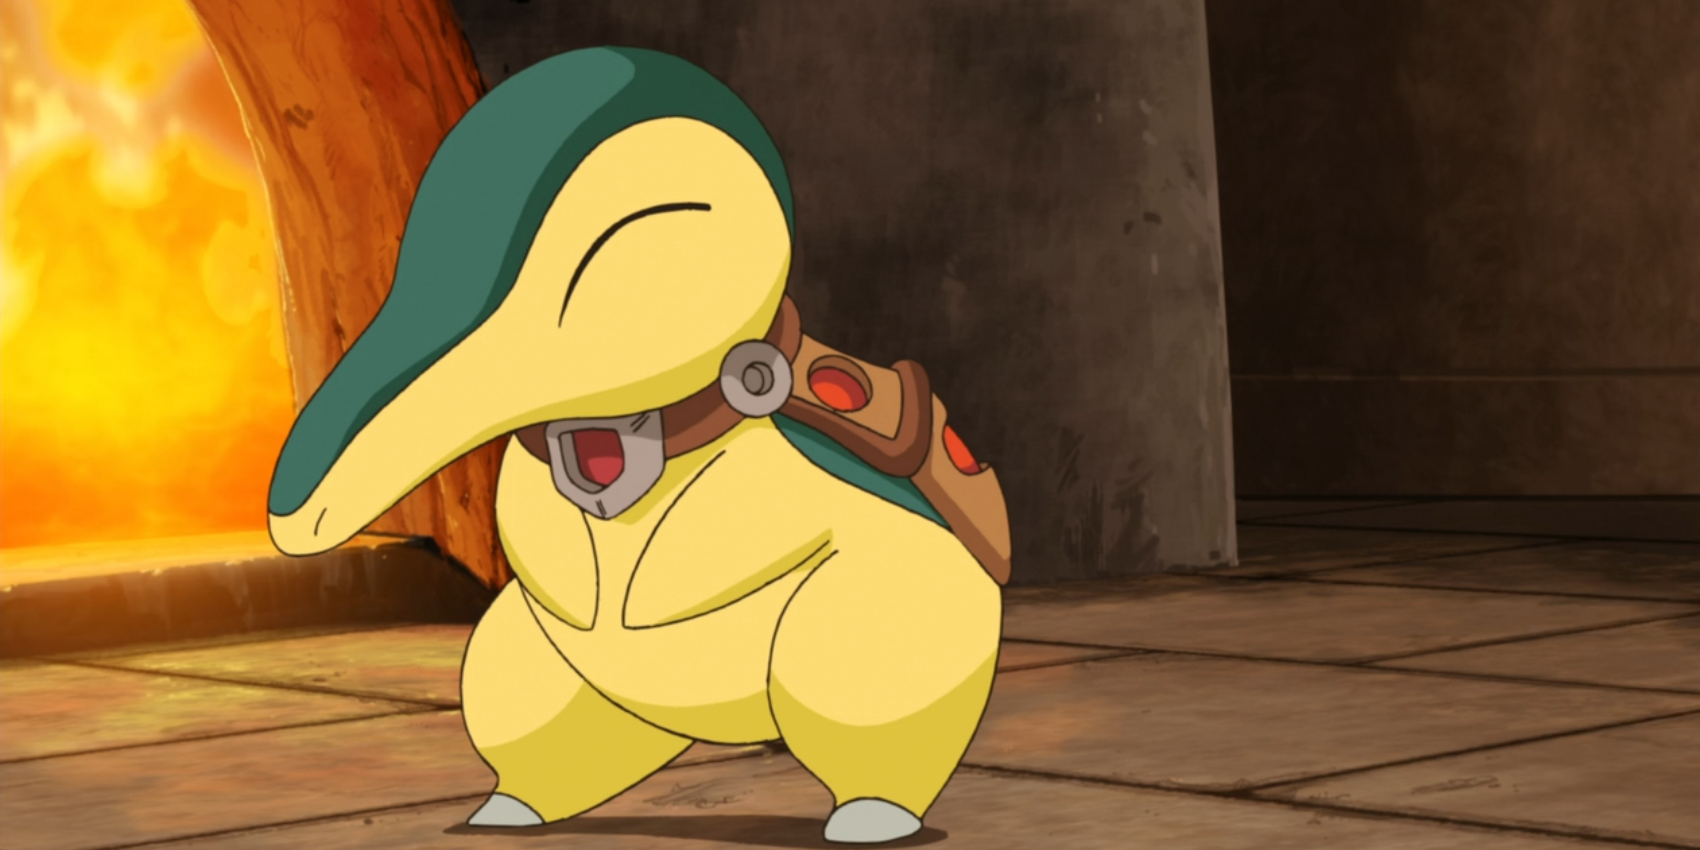 Cyndaquil wears a small backpack in the Pokémon series